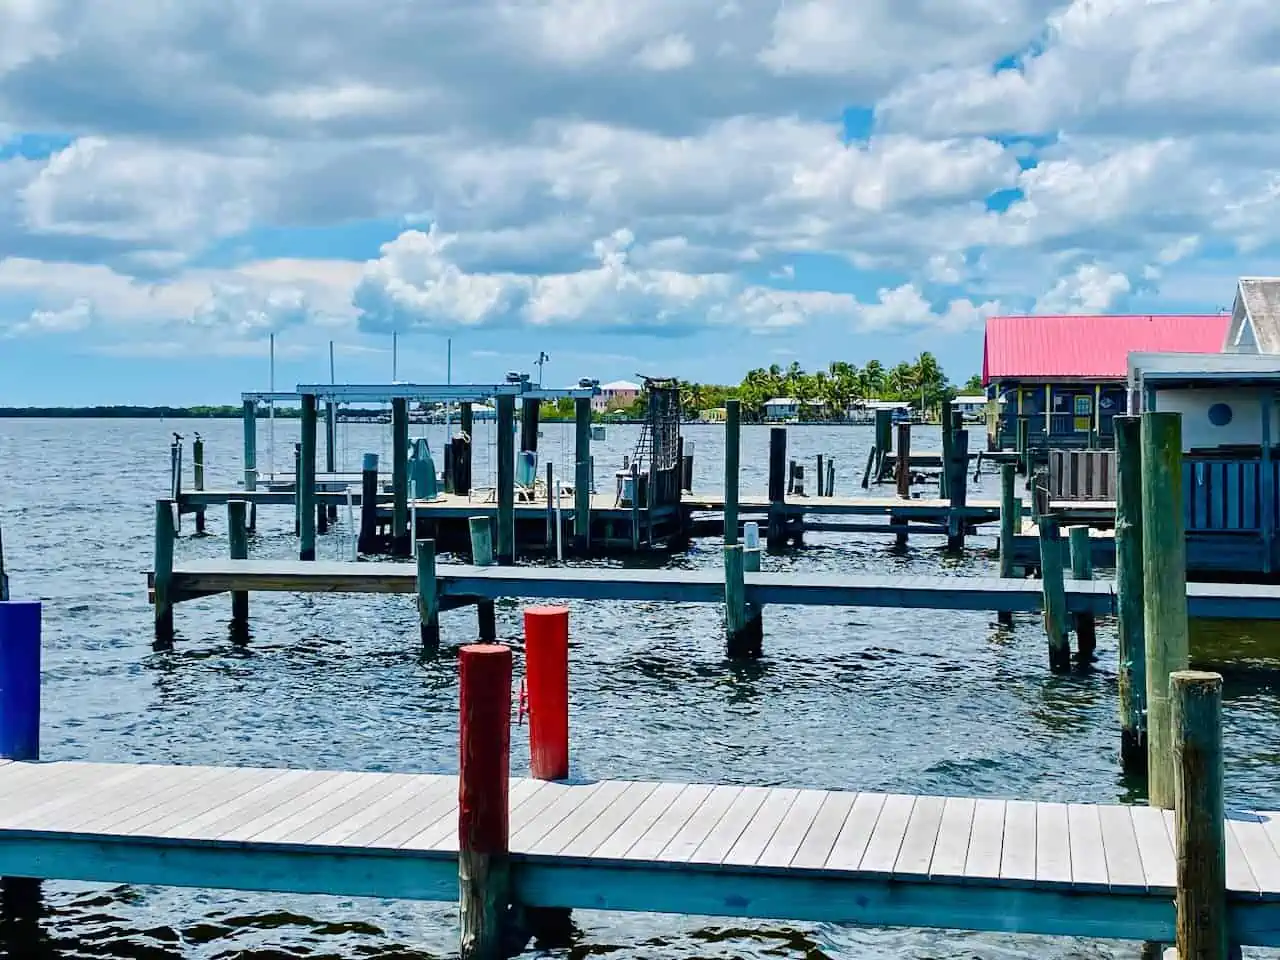 VRBO Matlacha FL - Photo of the water and docks in the area